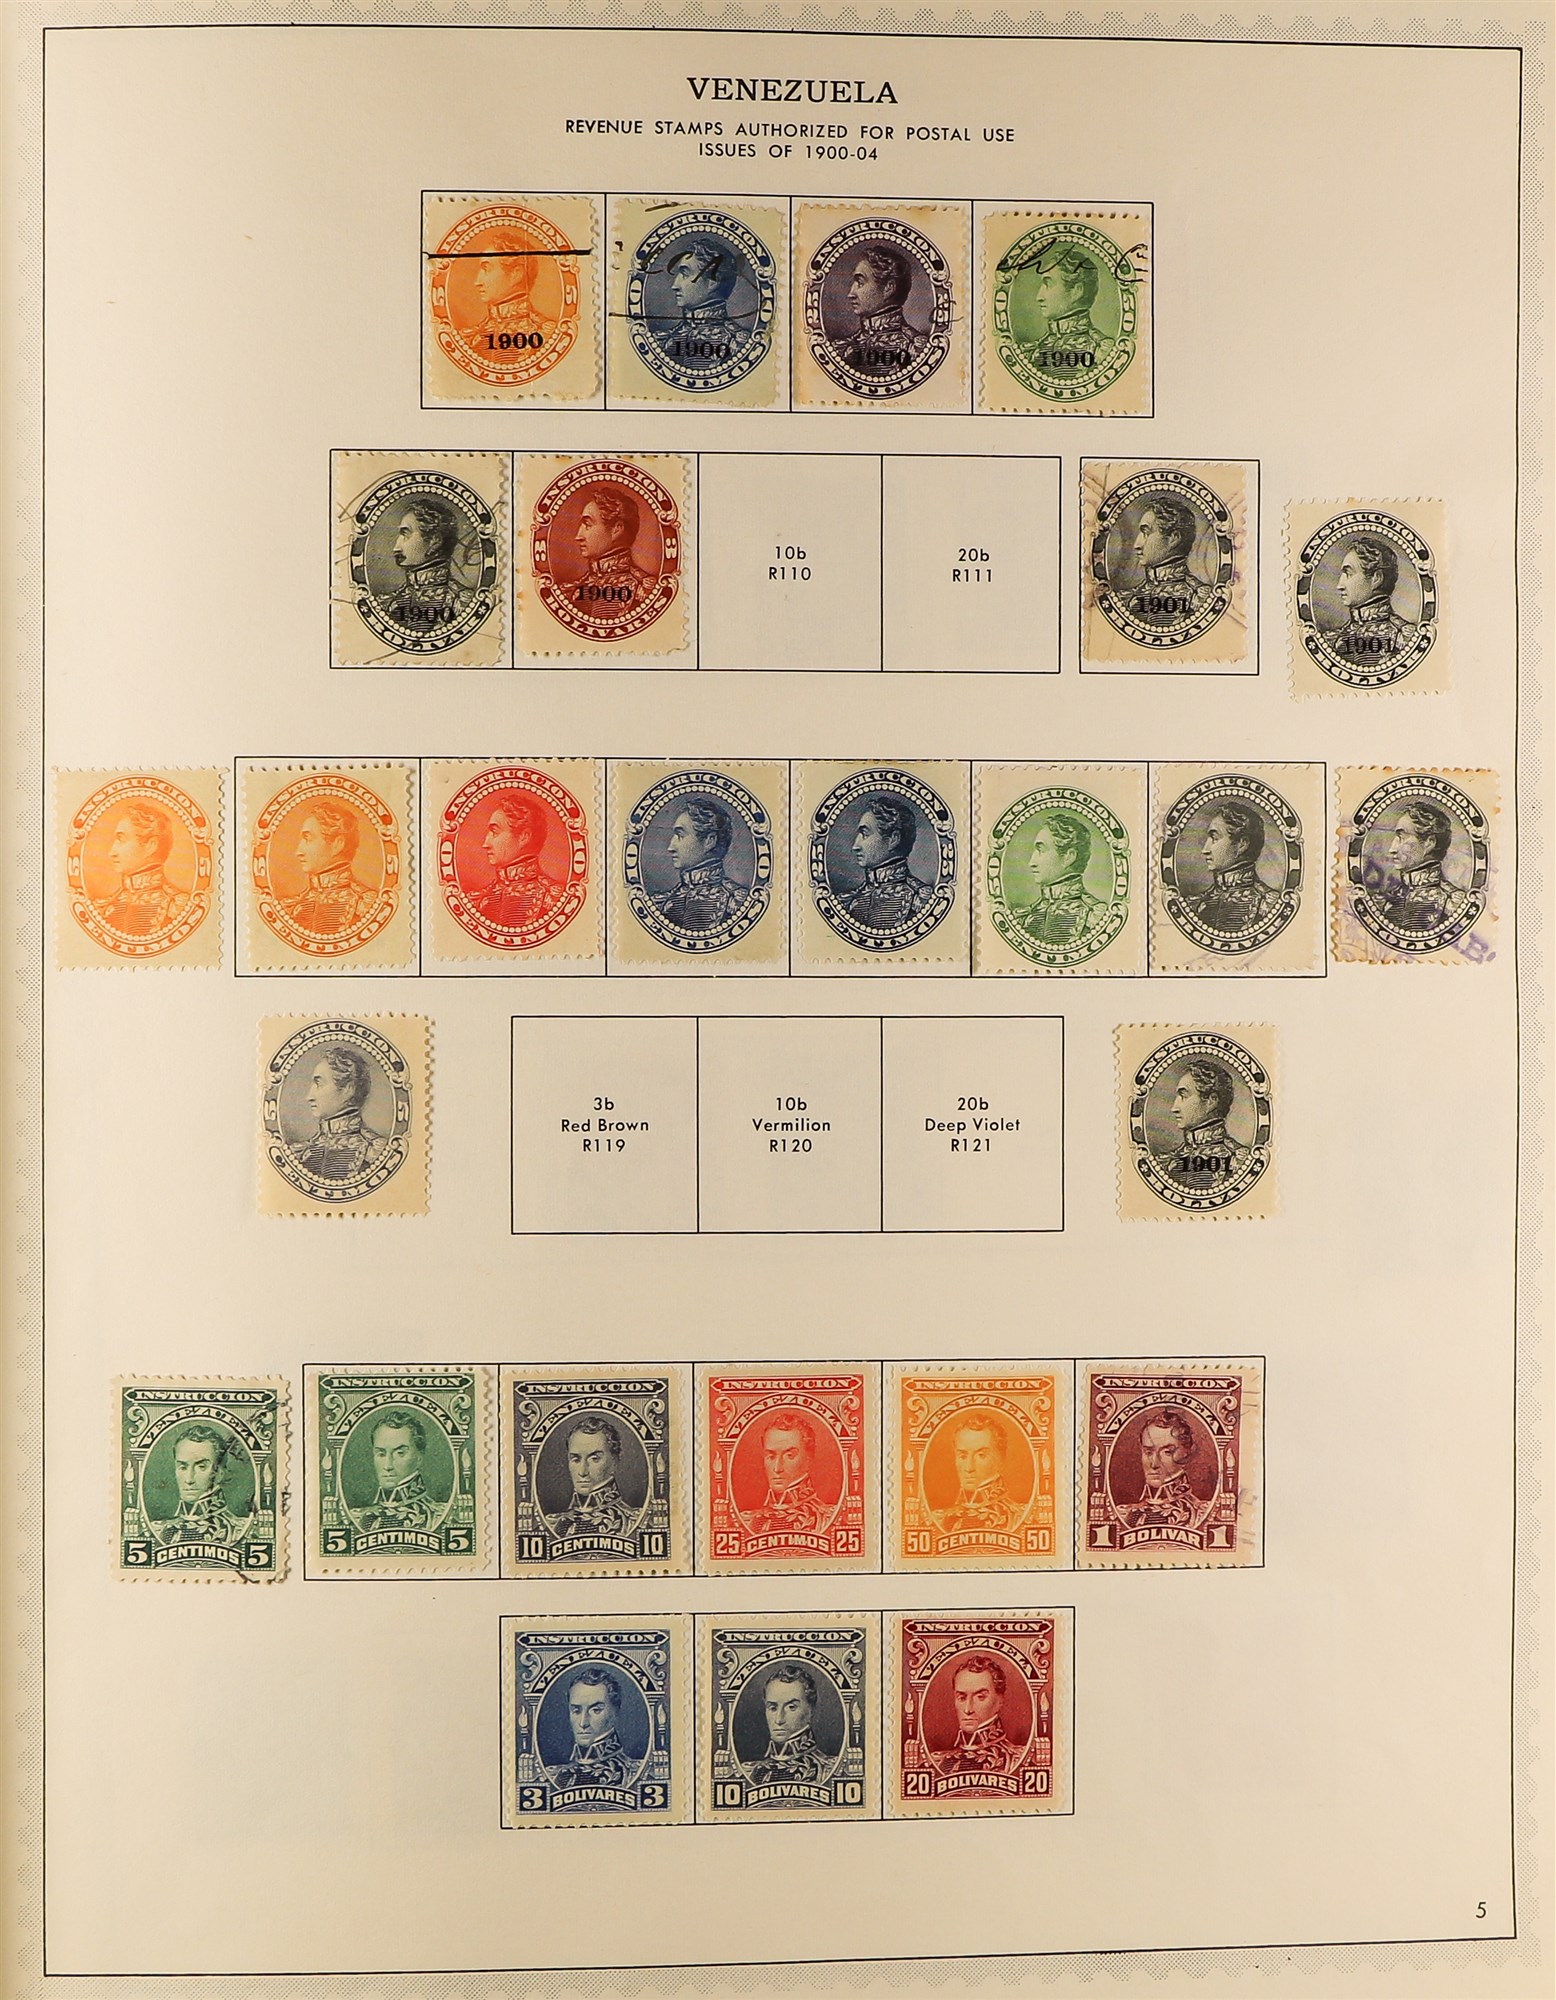 VENEZUELA 1859 - 1976 COLLECTION of 1500+ mint & used stamps in album, note 1859-62 Coat of Arms, - Image 10 of 19